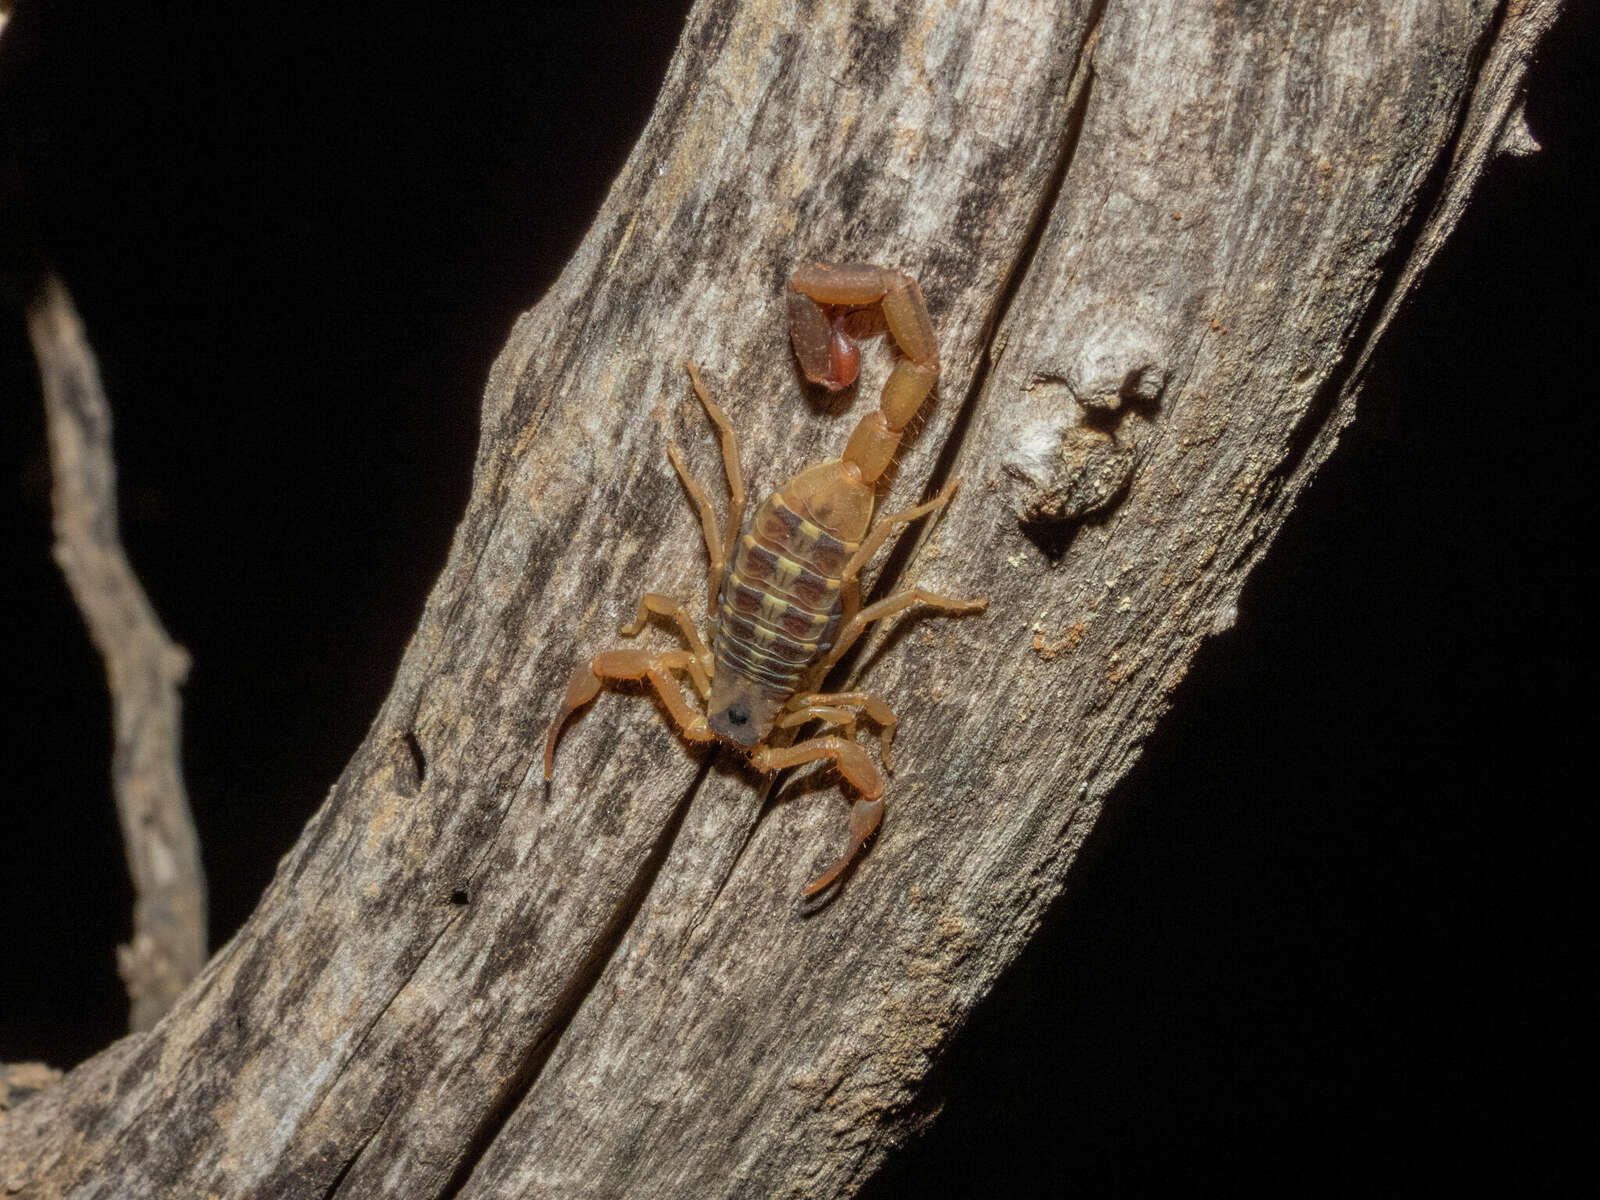 An image of a striped bark scorpion.